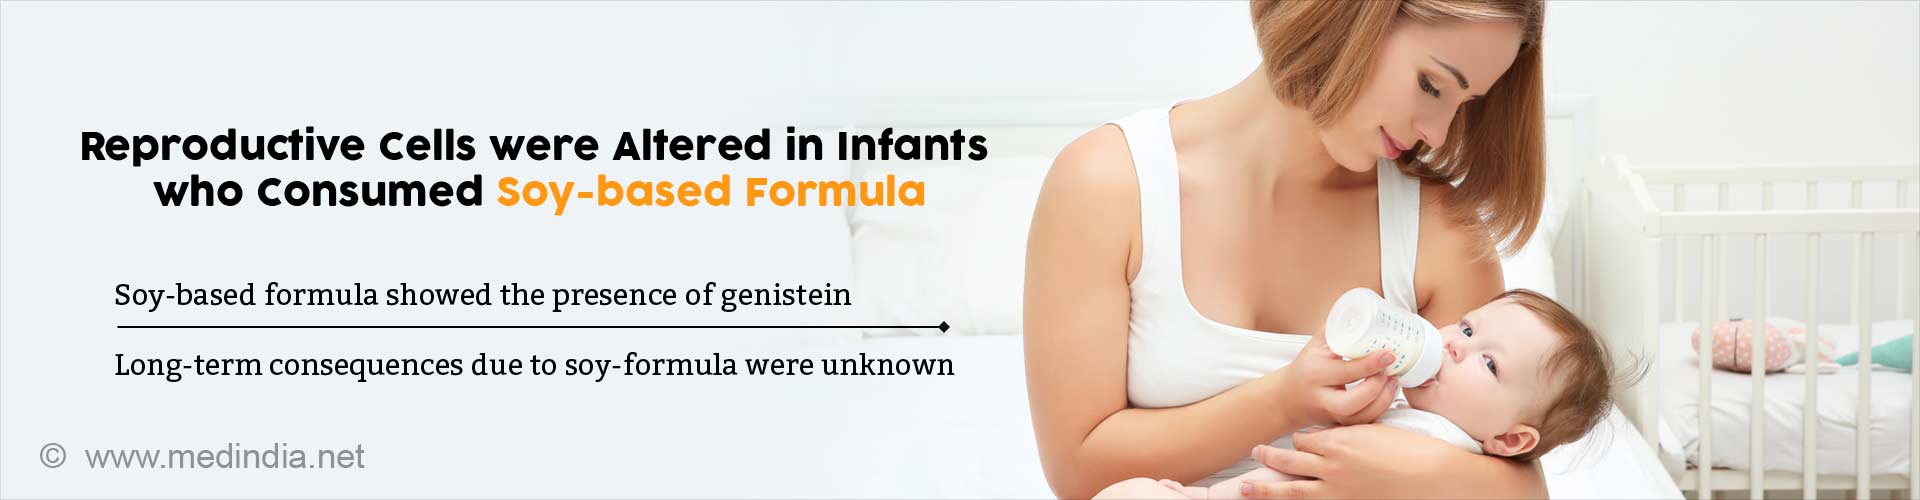 reproductive cells were altered in infants who consumed soy-based formula
- soy-based formula showed the presence of genistein
- long-term consequences due to soy-formula were unknown
